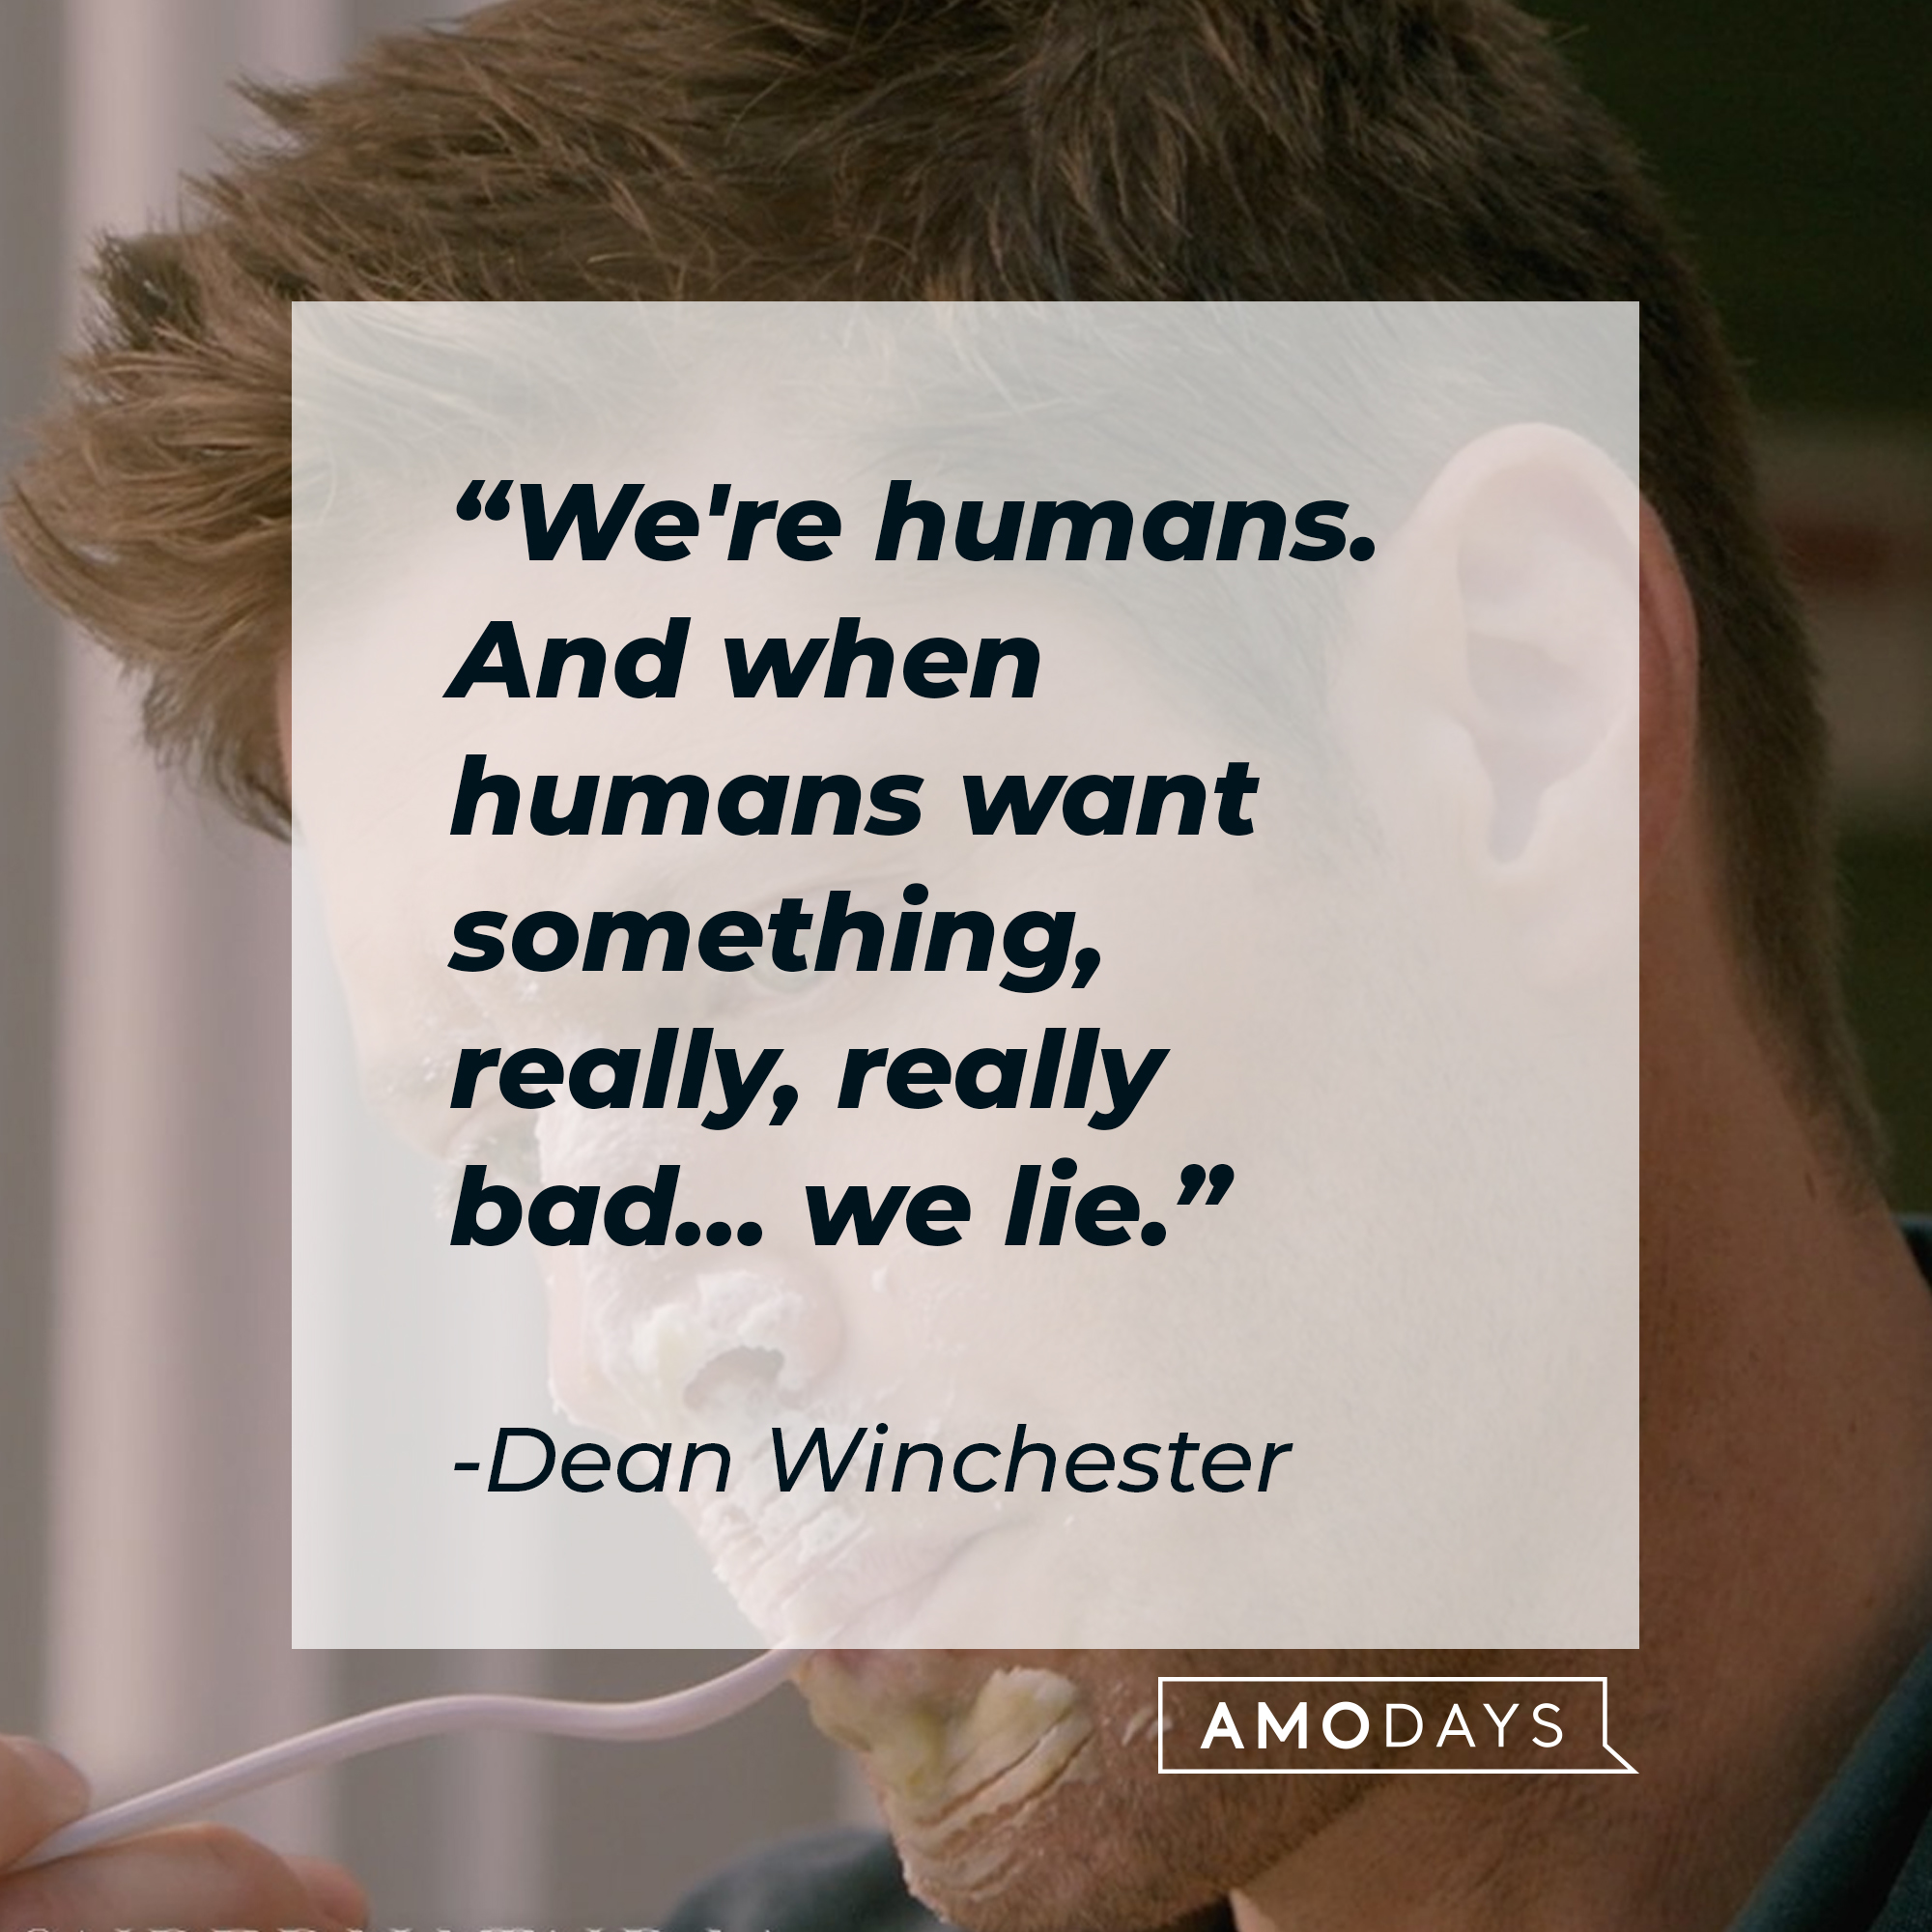 Dean Winchester's quote: "We're humans. And when humans want something, really, really bad... we lie." | Source: facebook.com/Supernatural